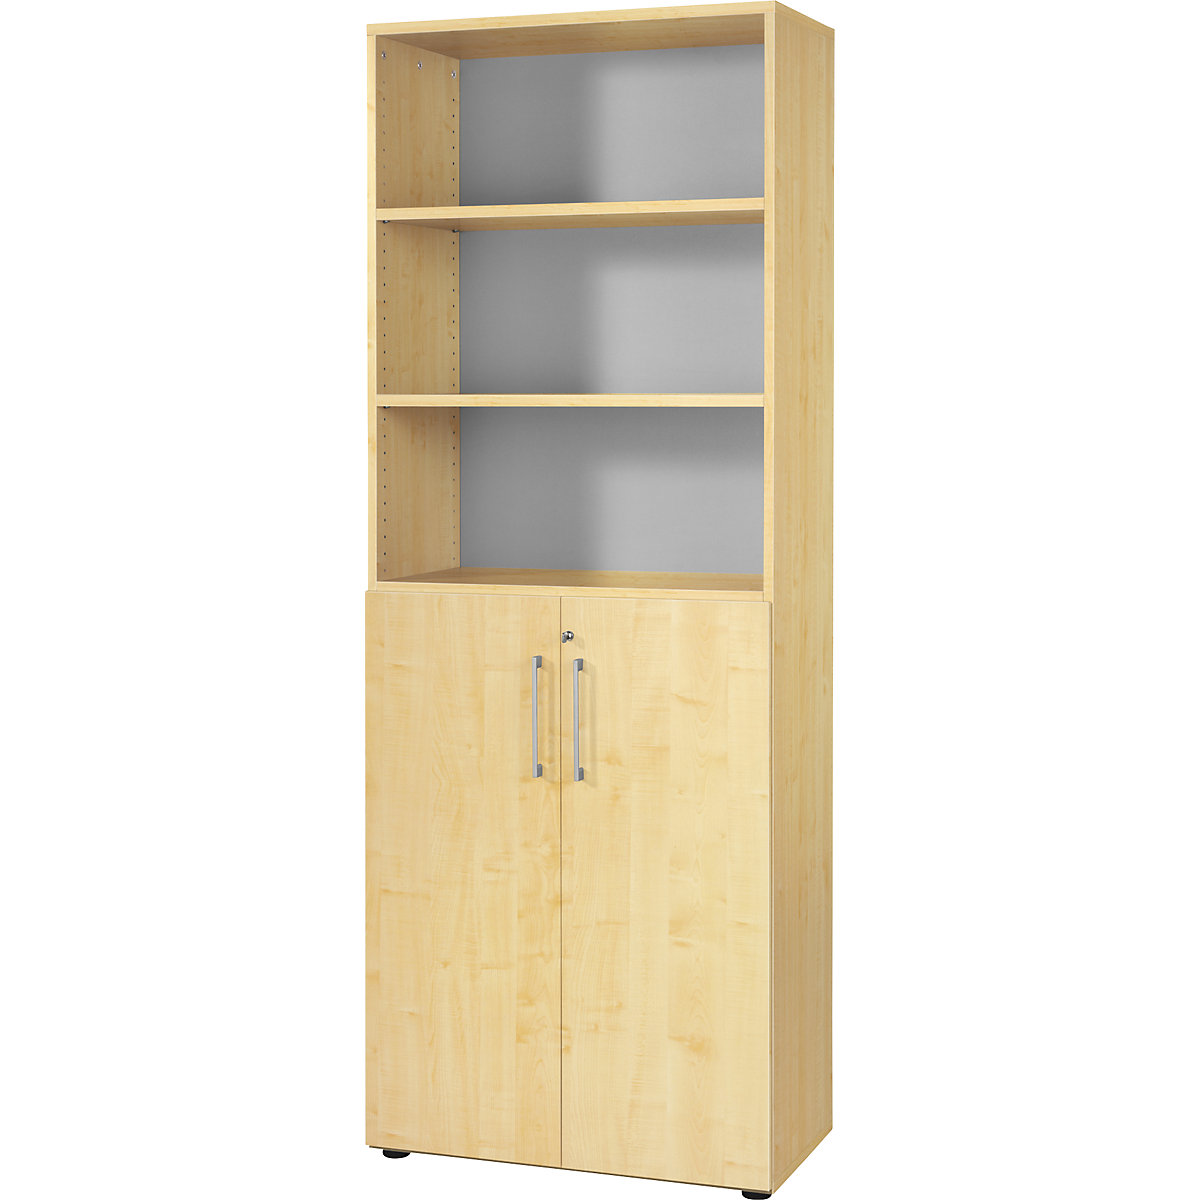 Office cupboard/shelf unit RENATUS – eurokraft pro, 5 shelves, 6 file heights (3 of which are open), maple finish-9